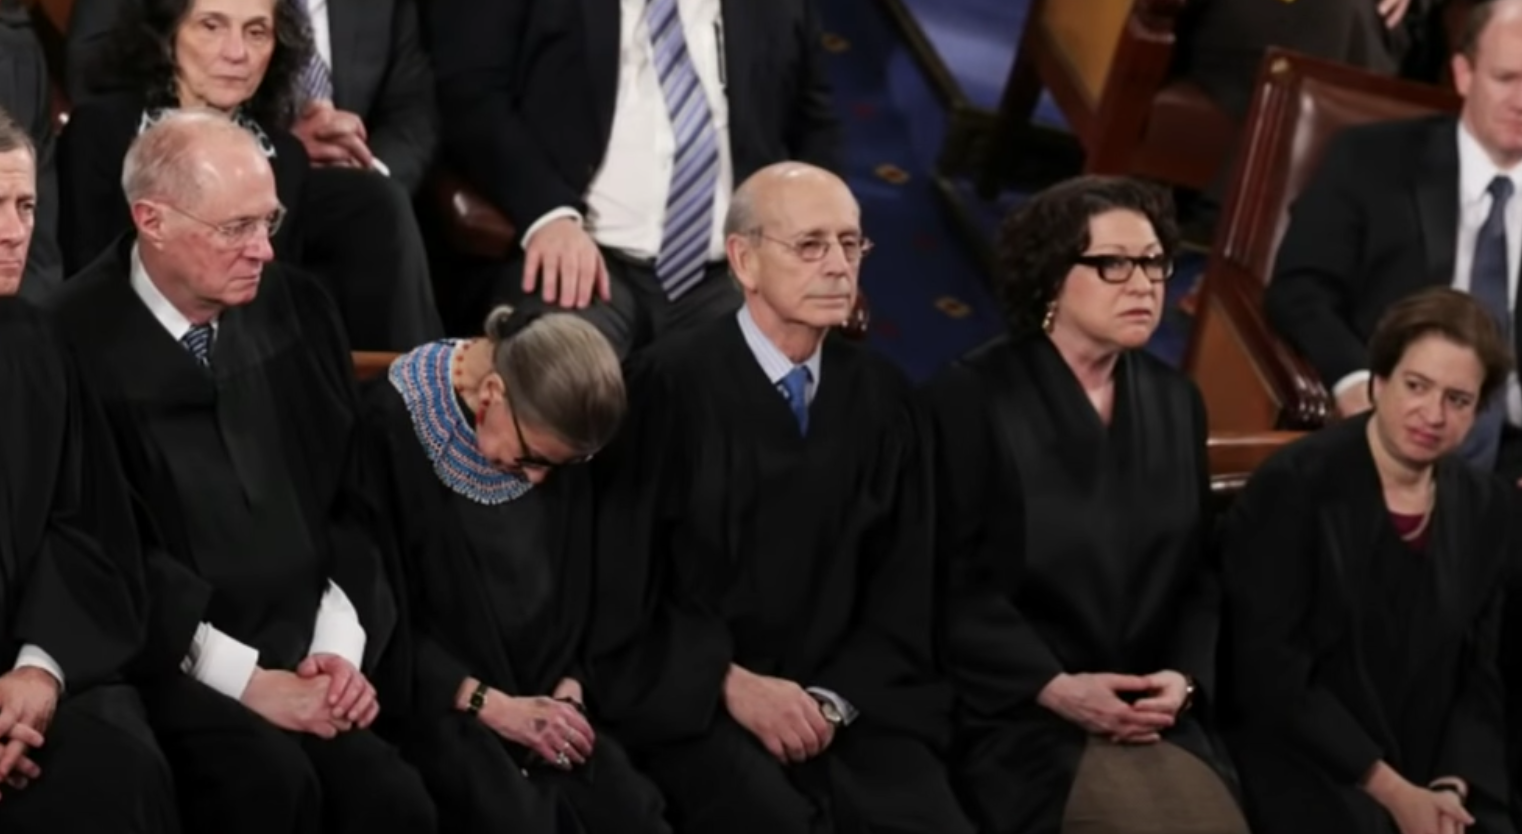 Lies: RBG Hospitalized For Recurrence Of Liver Cancer, Not To Clean Out A Stent